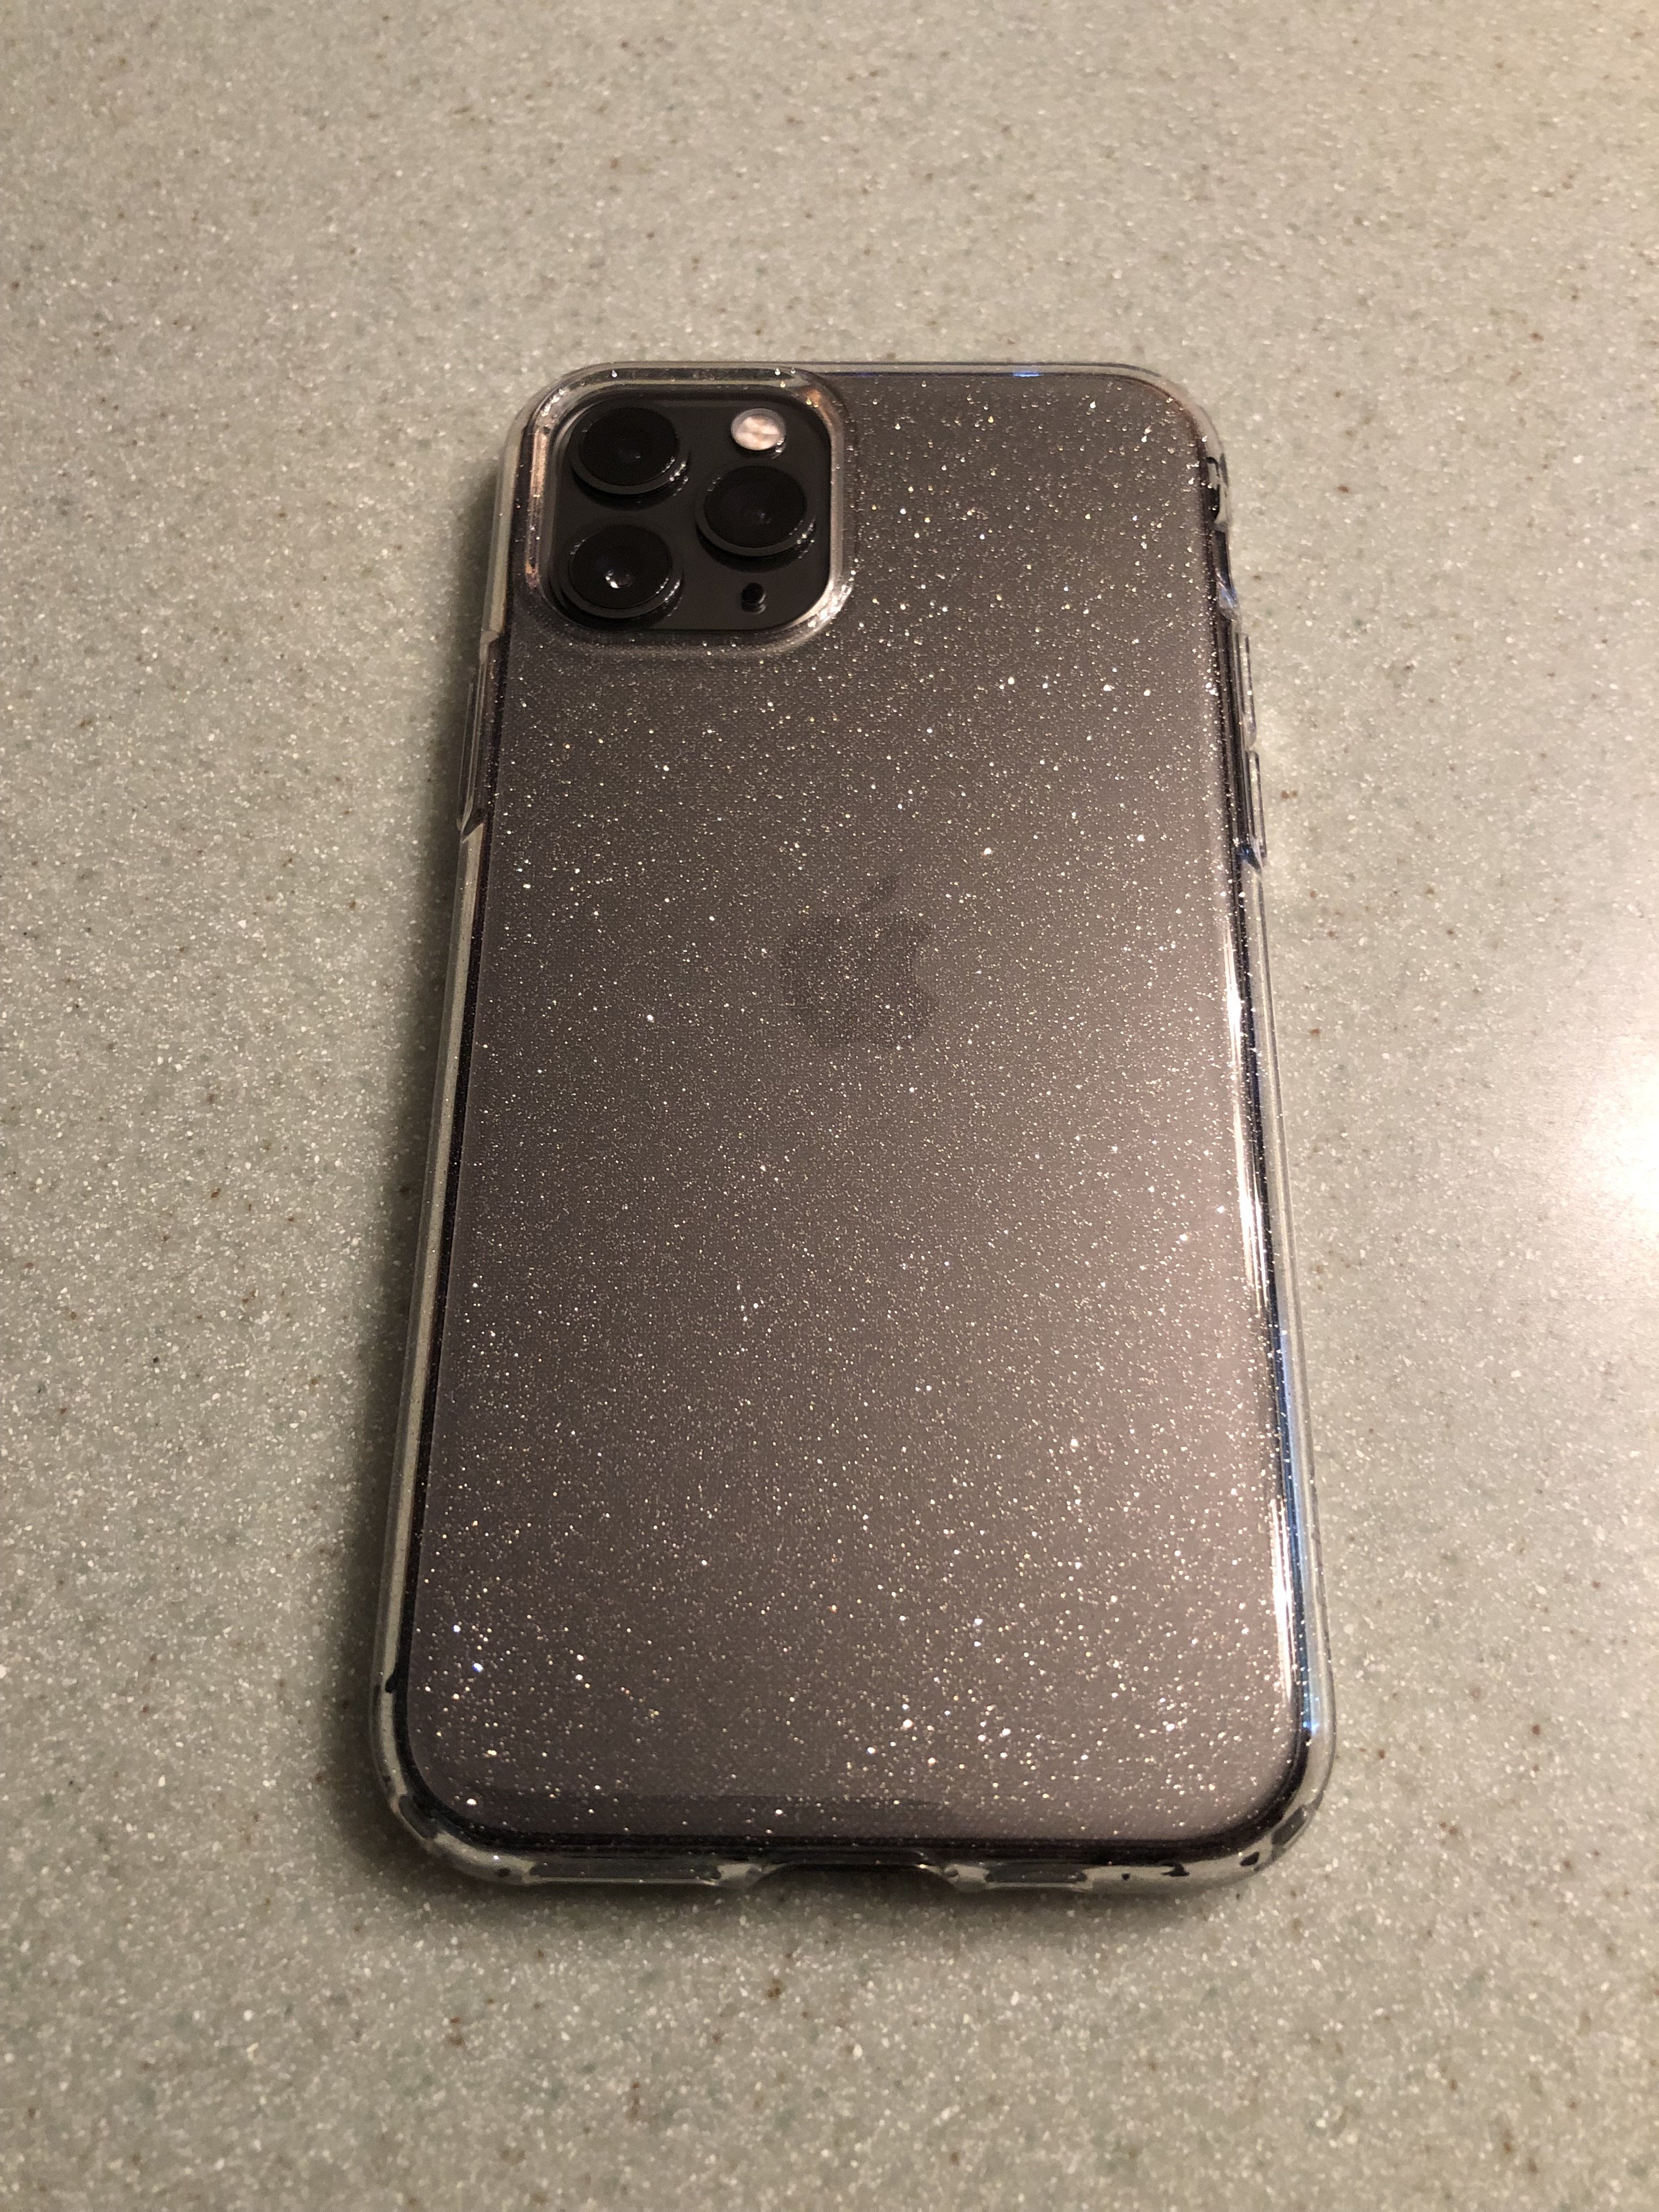 Which Case Did You Get For Your New Iphone 11 Pro Max Merged Page 34 Macrumors Forums